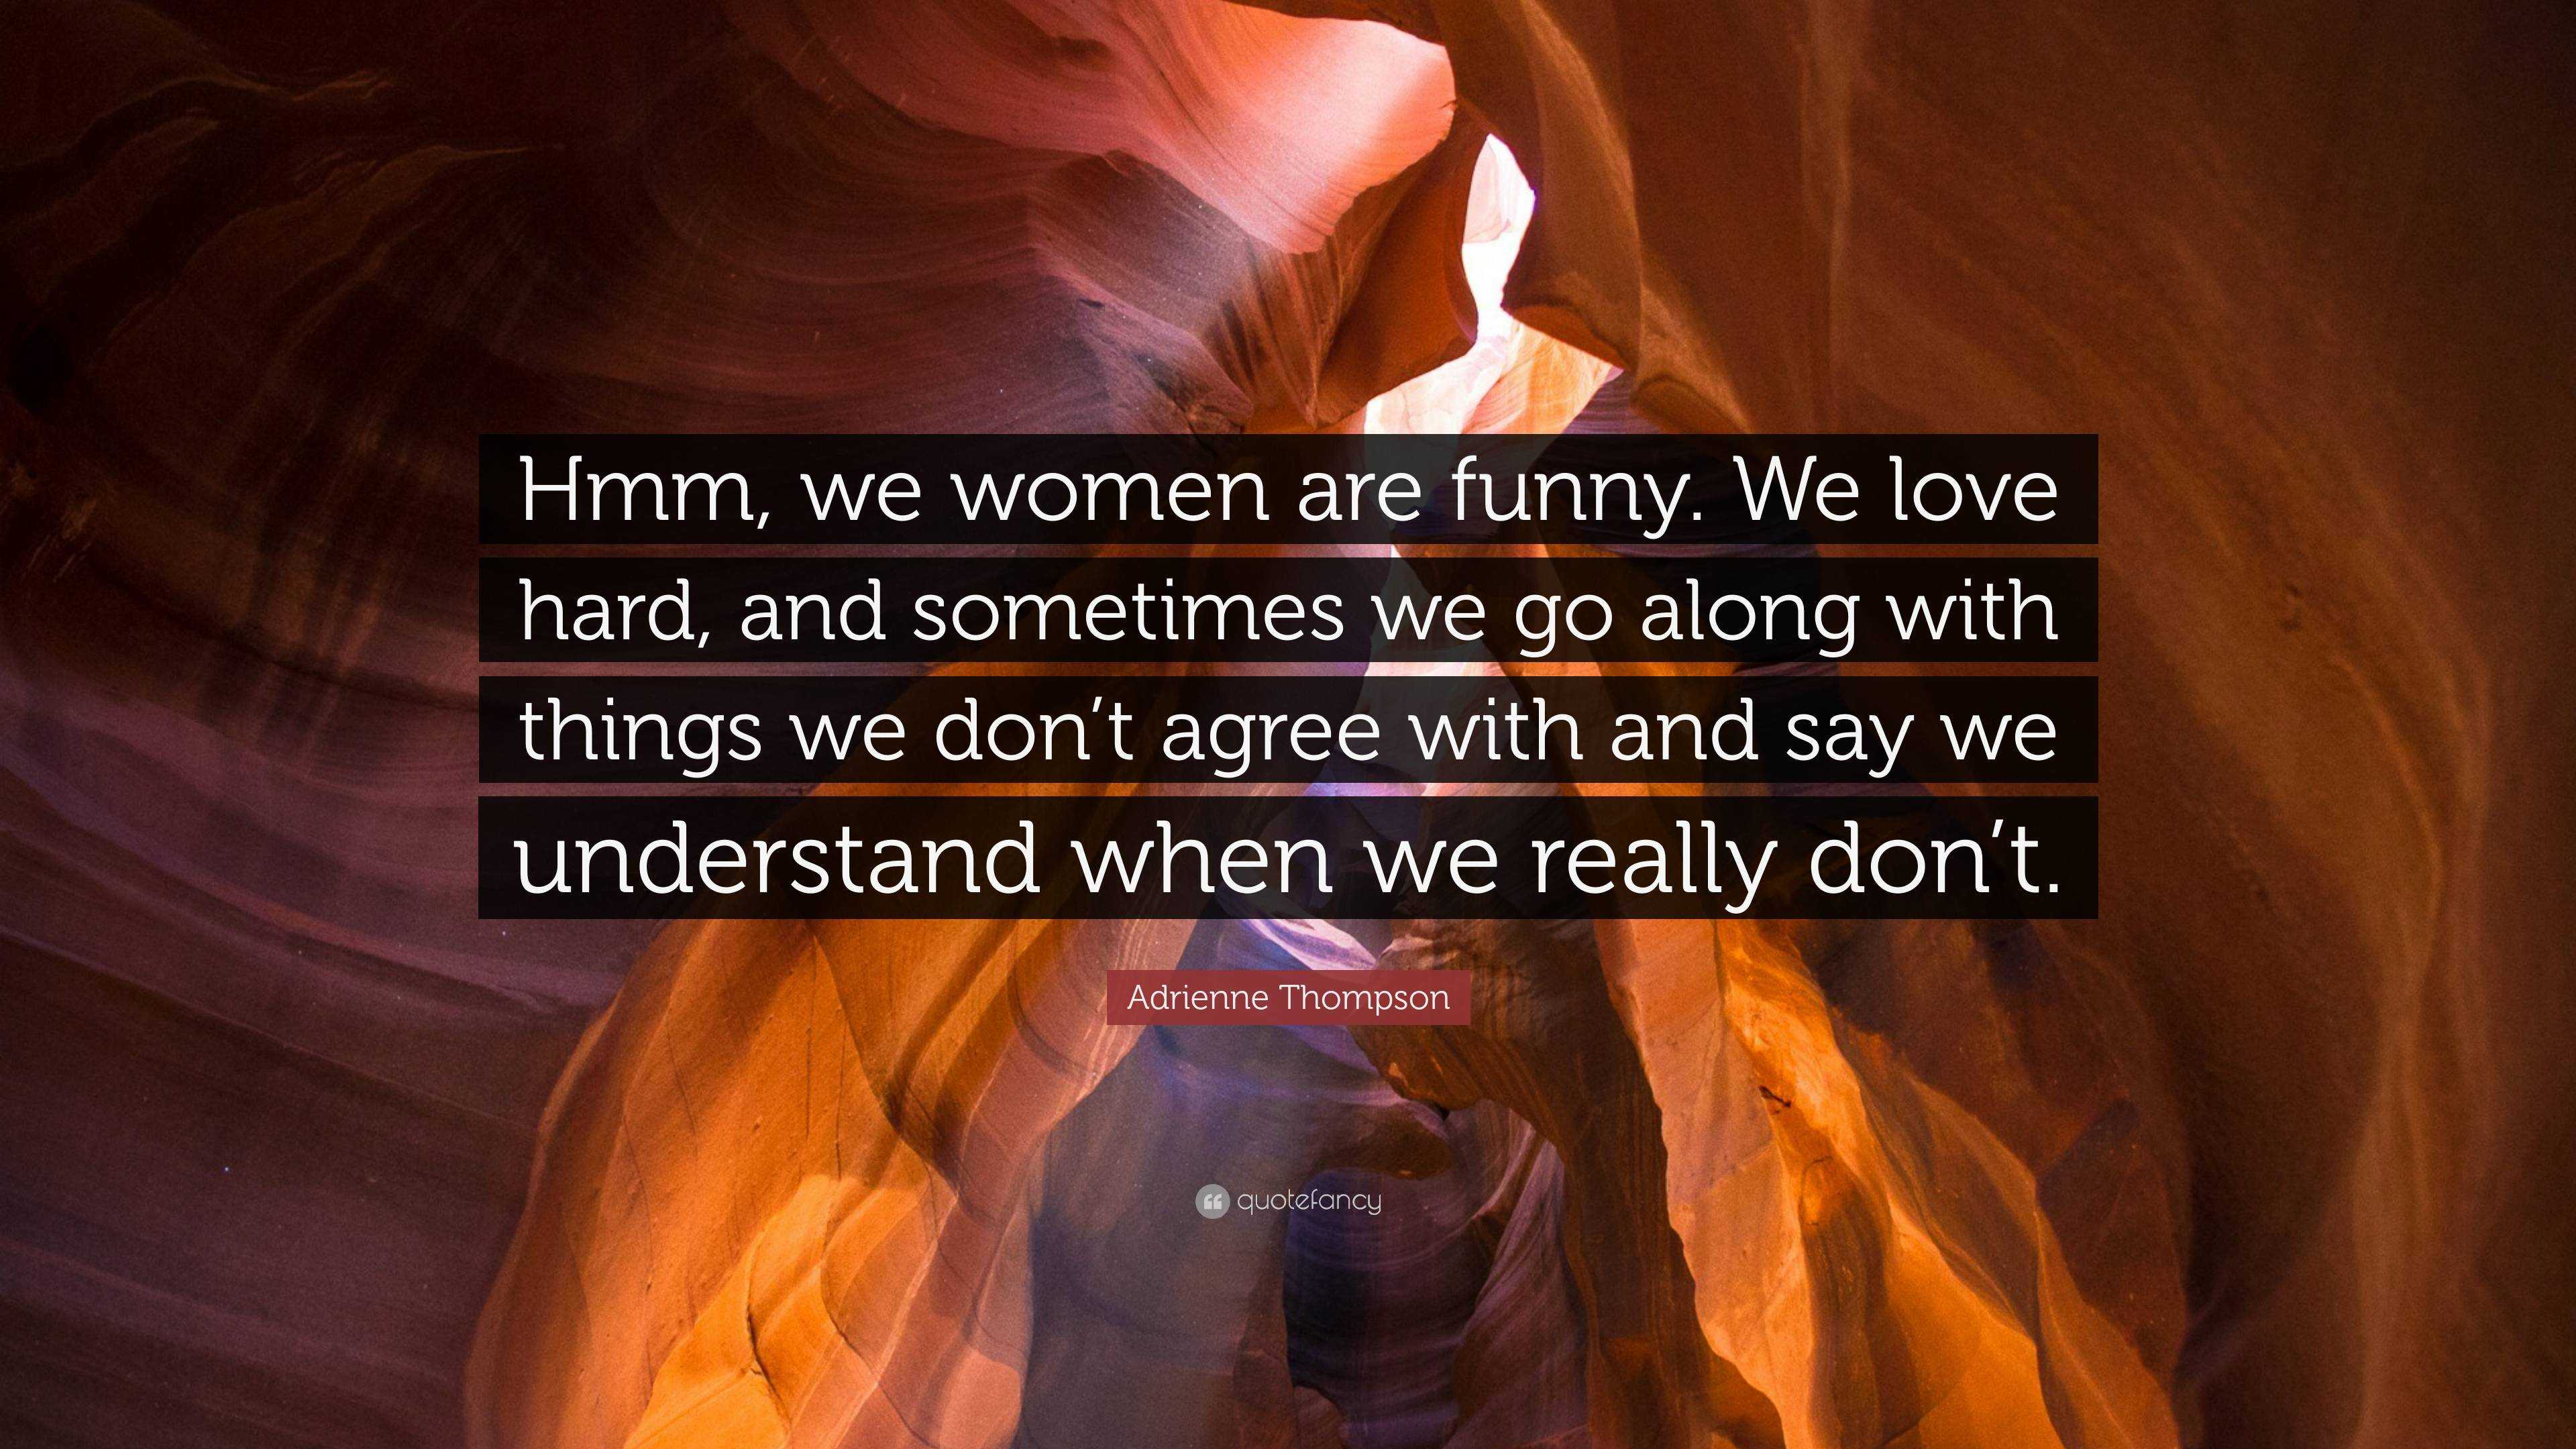 Adrienne Thompson Quote: “Hmm, we women are funny. We love hard, and  sometimes we go along with things we don't agree with and say we understand  w...”